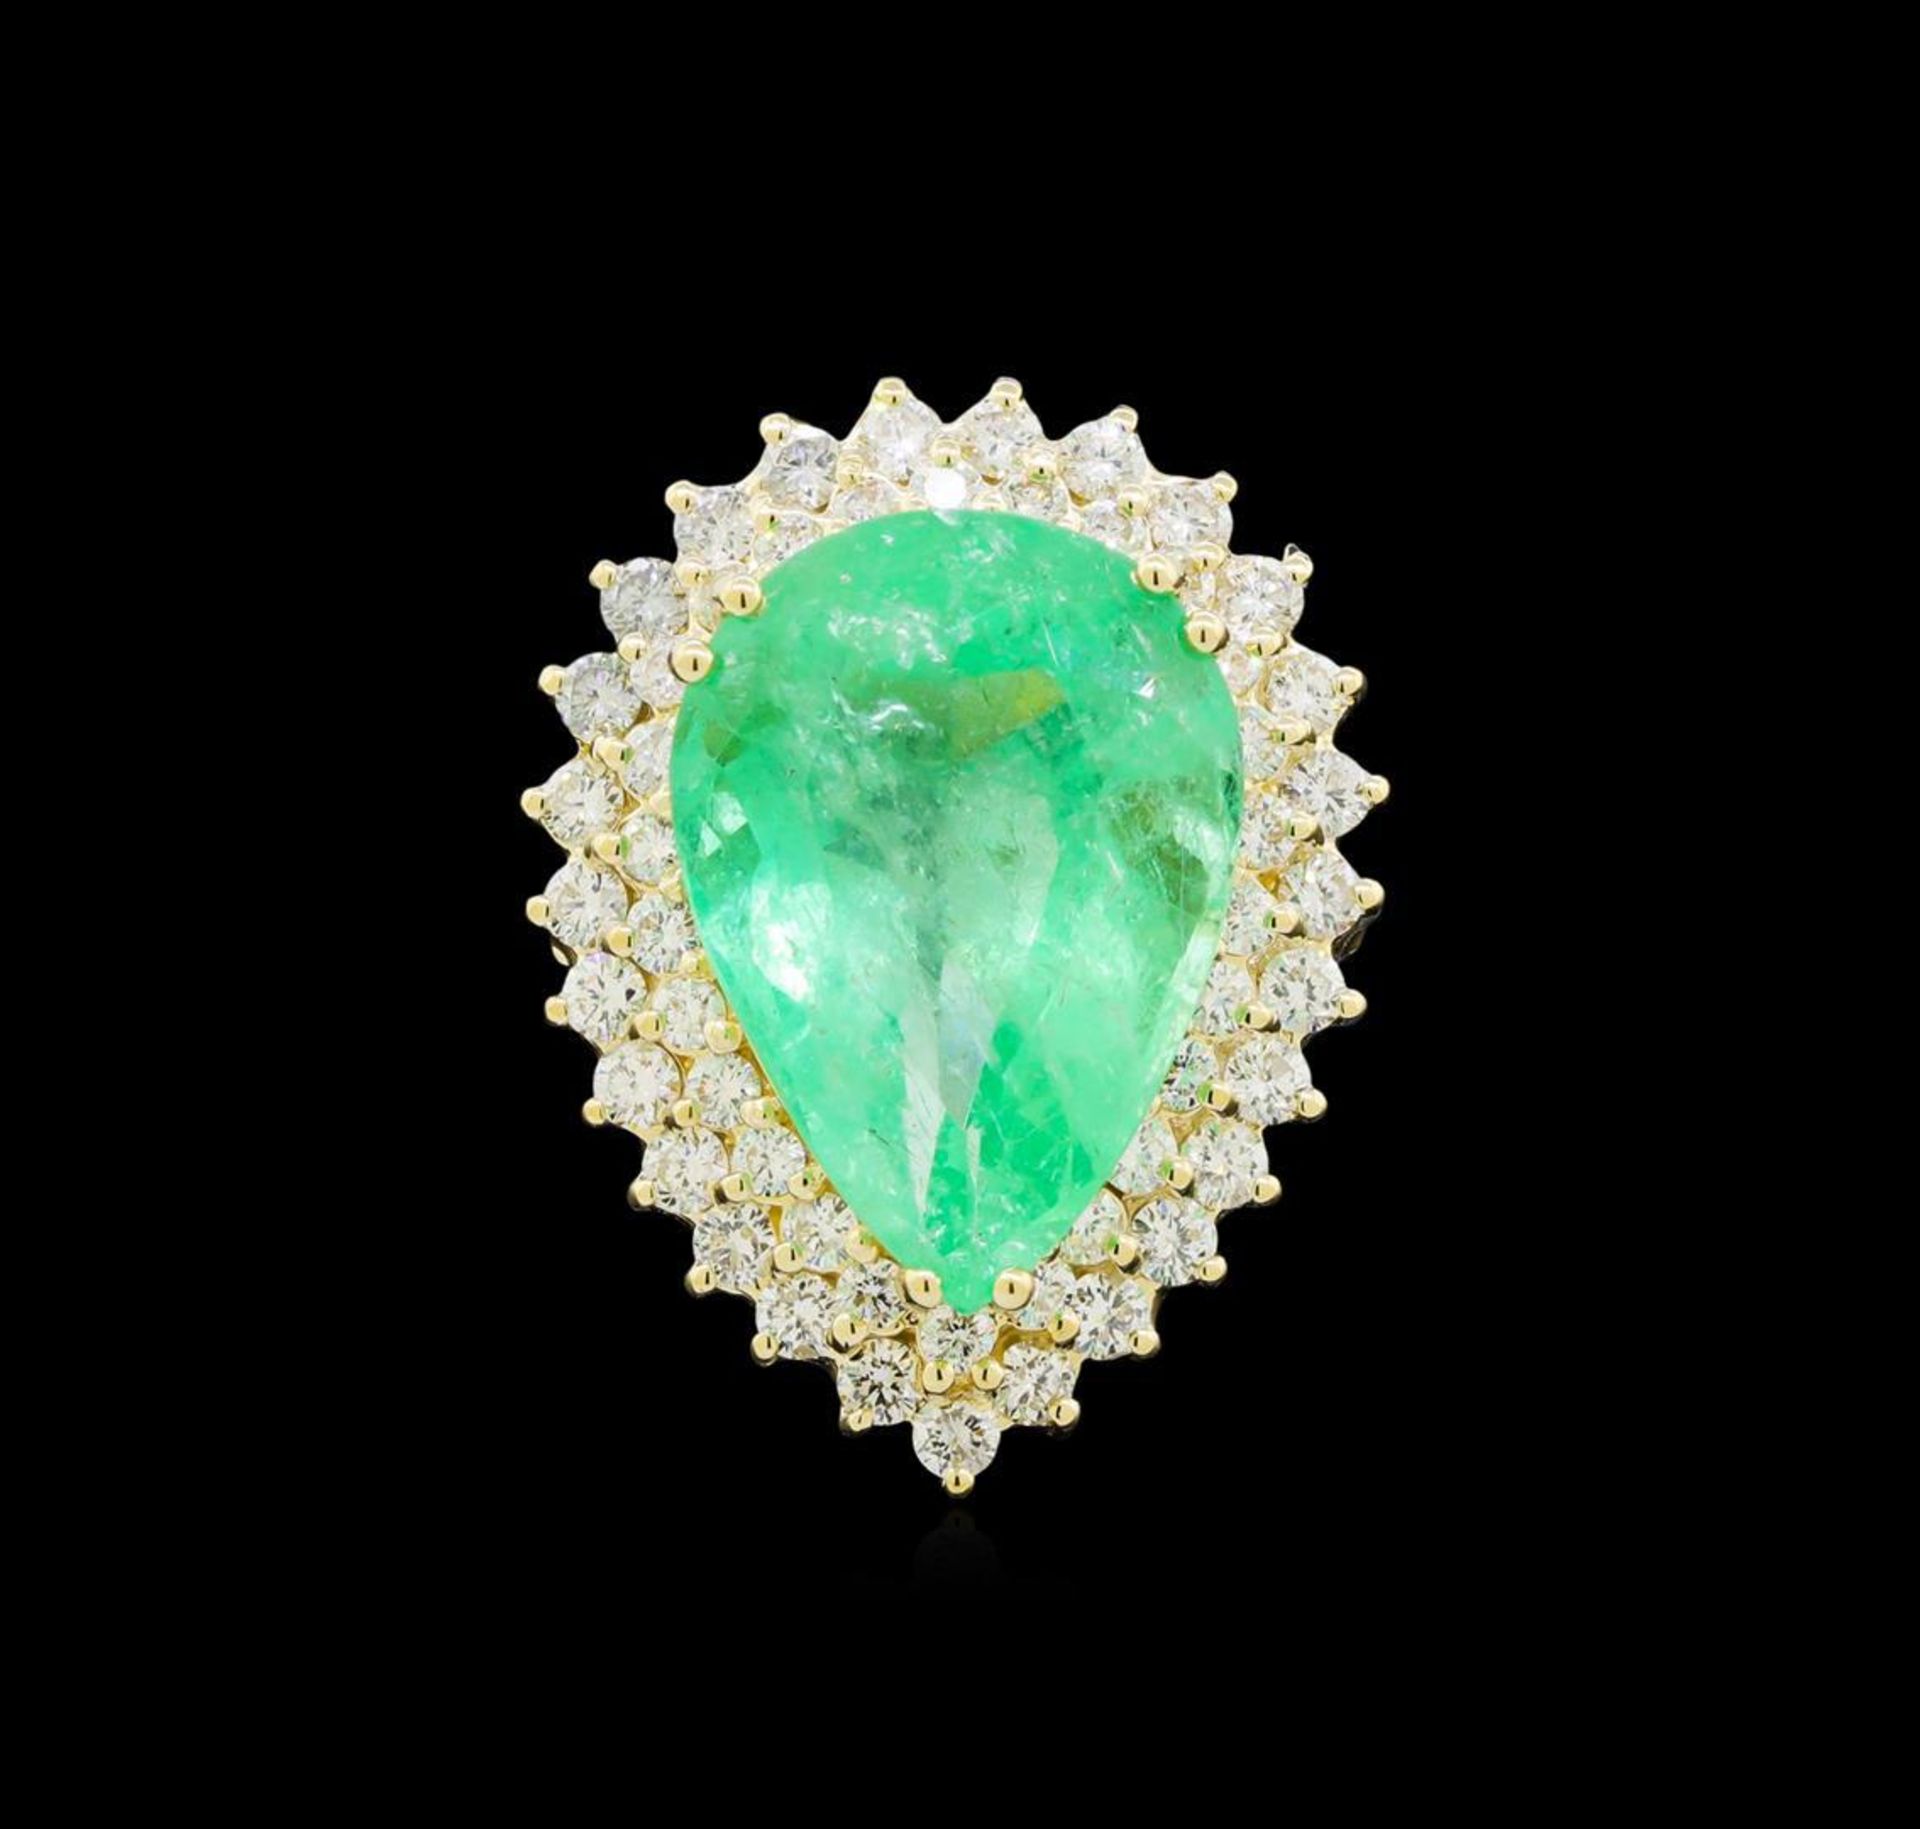 GIA Cert 17.66 ctw Emerald and Diamond Ring - 14KT Yellow Gold - Image 2 of 6